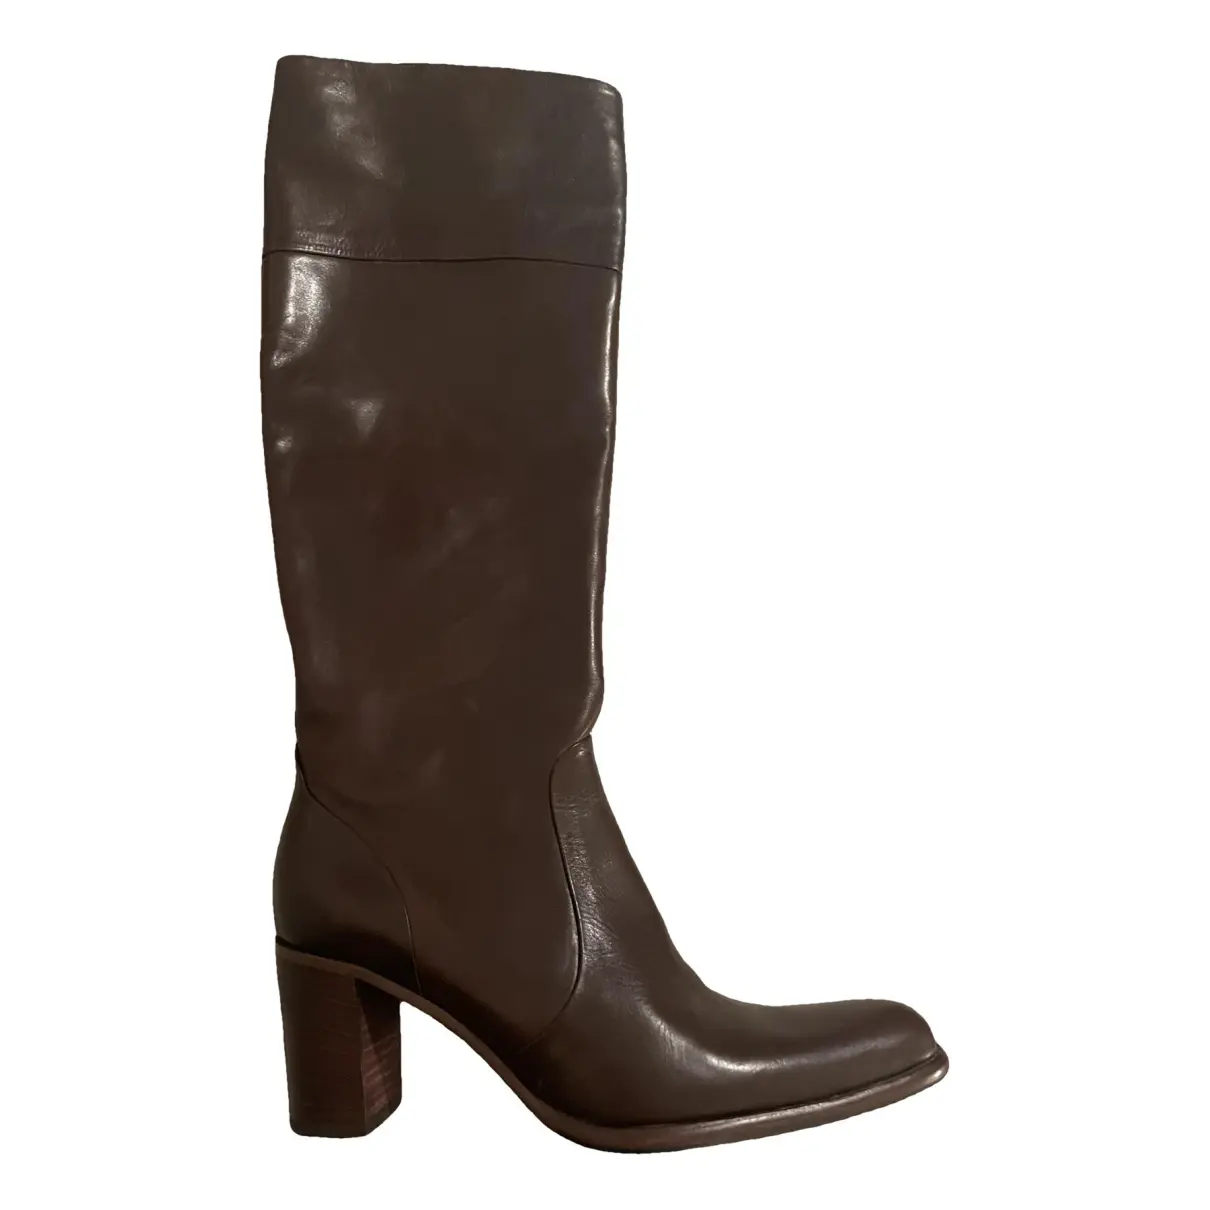 Queenie leather riding boots